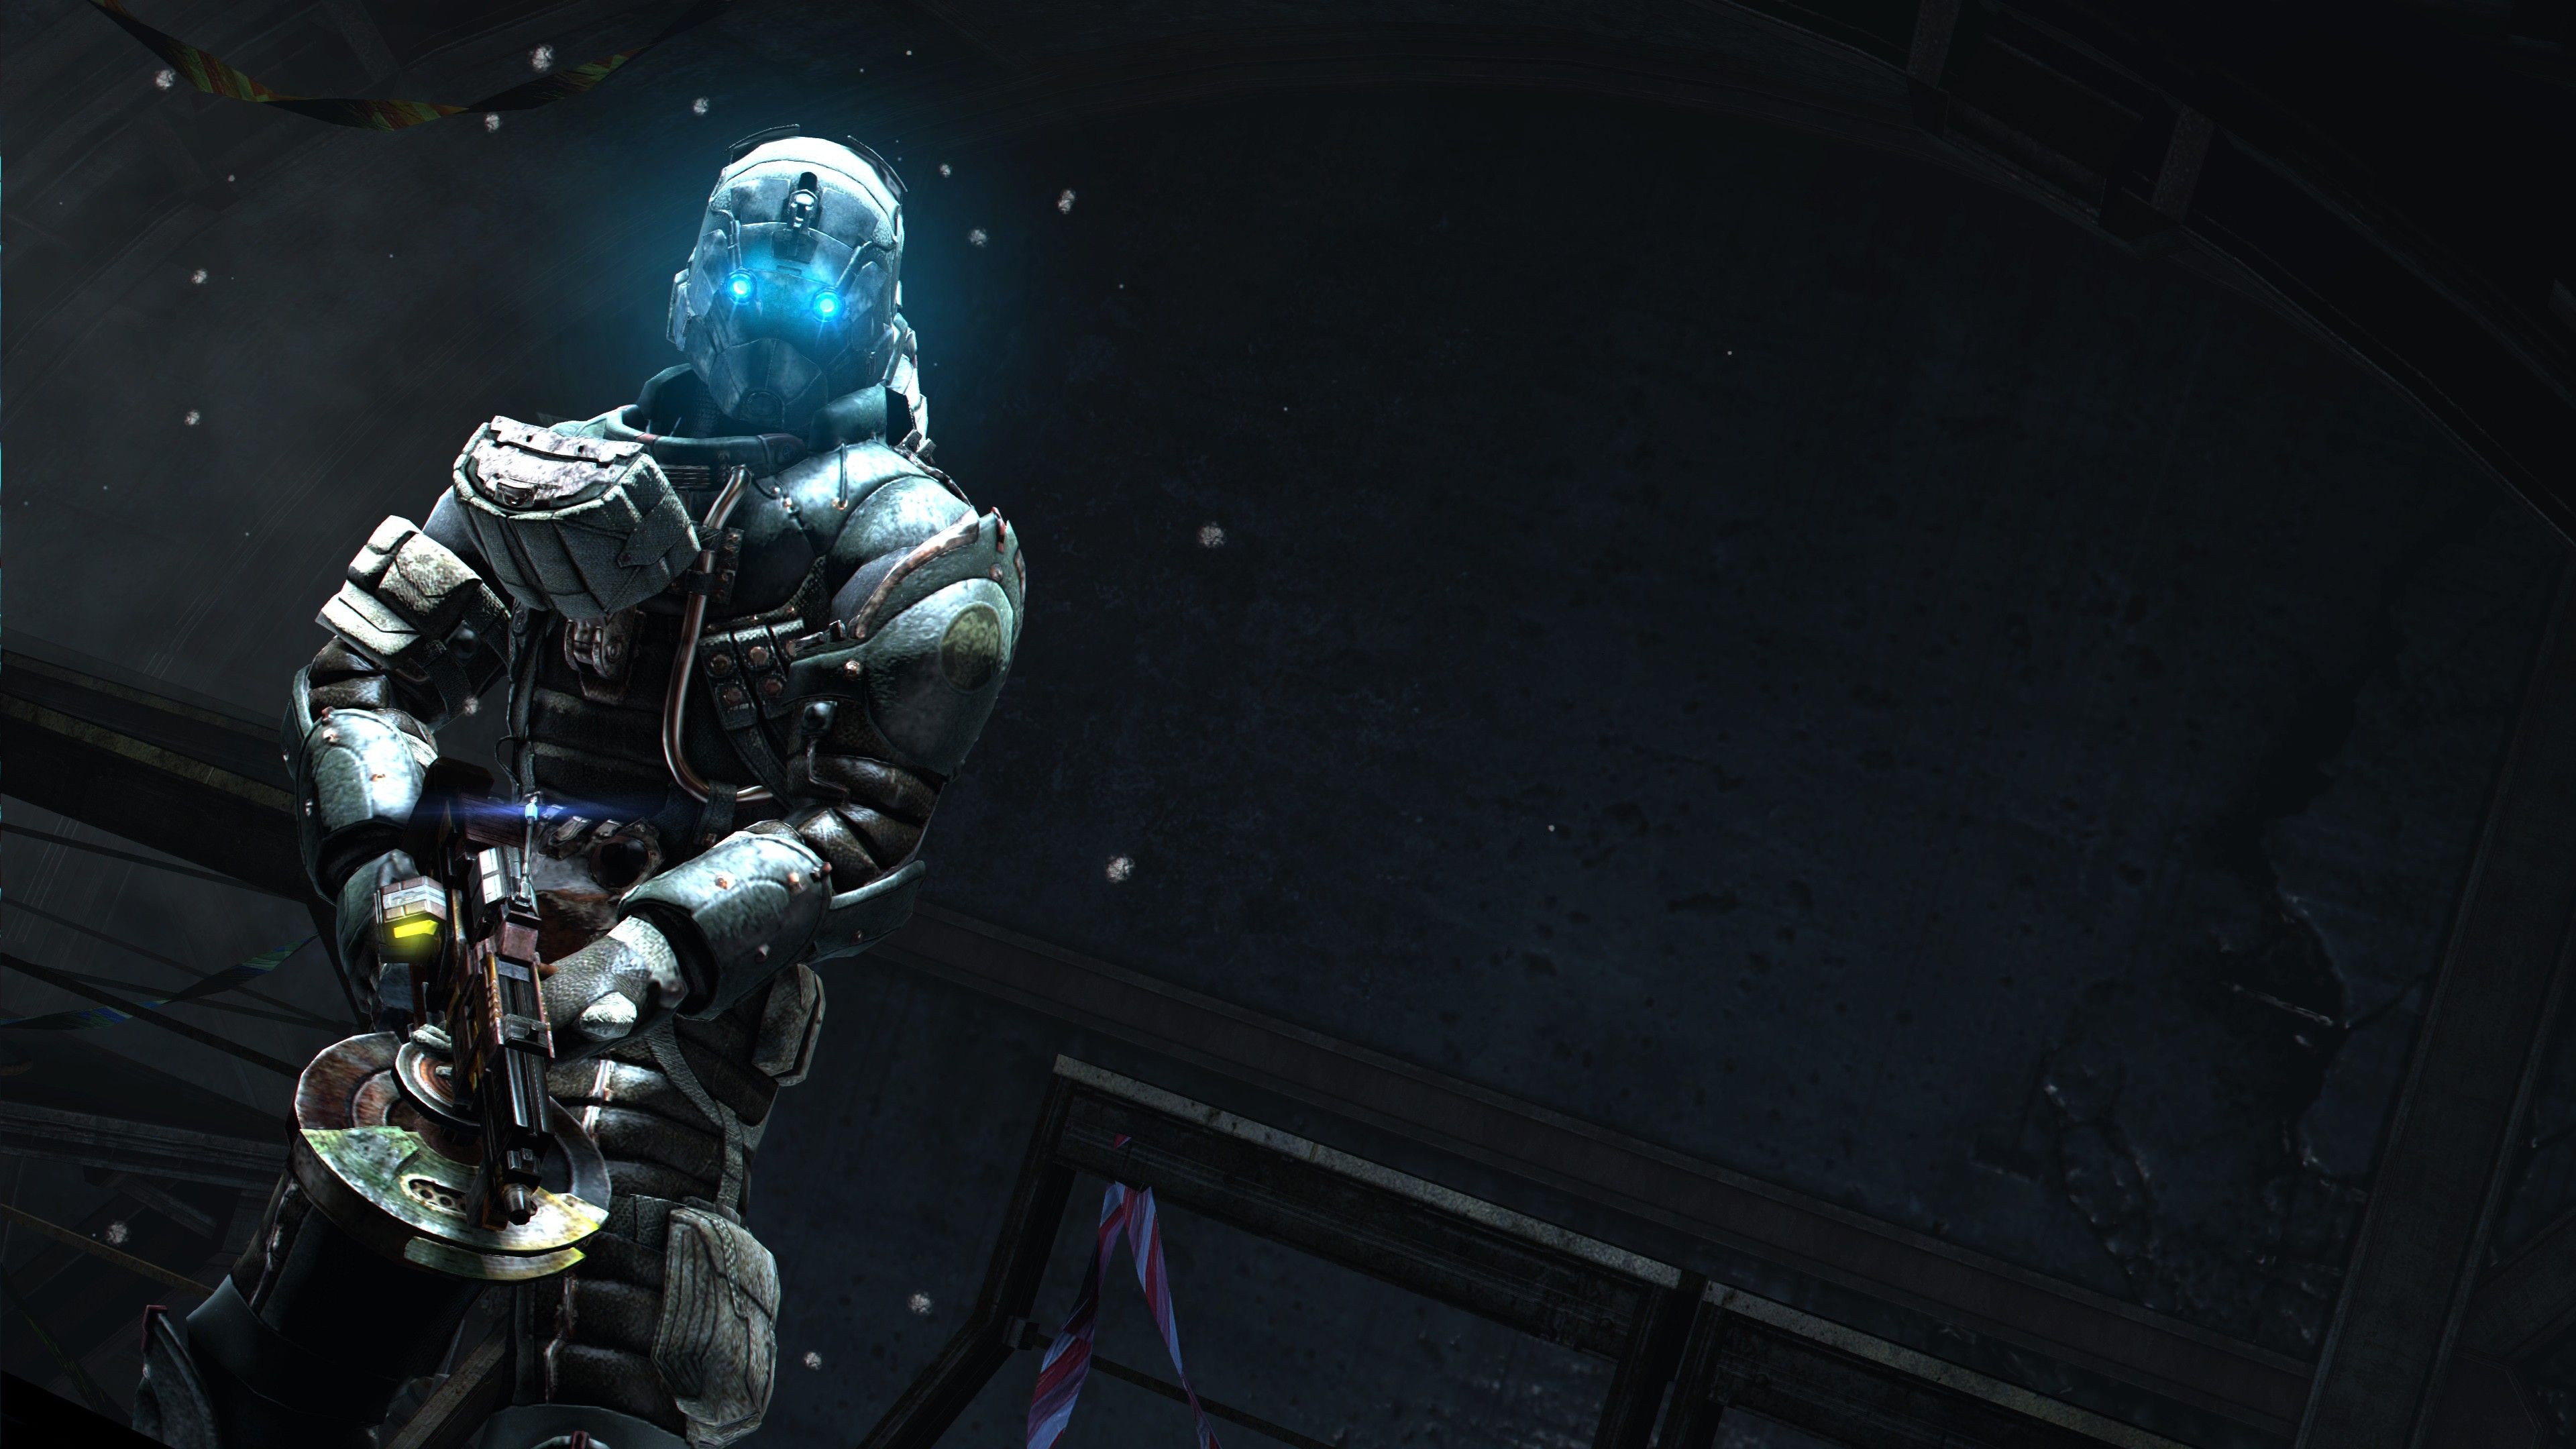 73 Dead Space 3 HD Wallpapers | Backgrounds - Wallpaper Abyss - Page 2